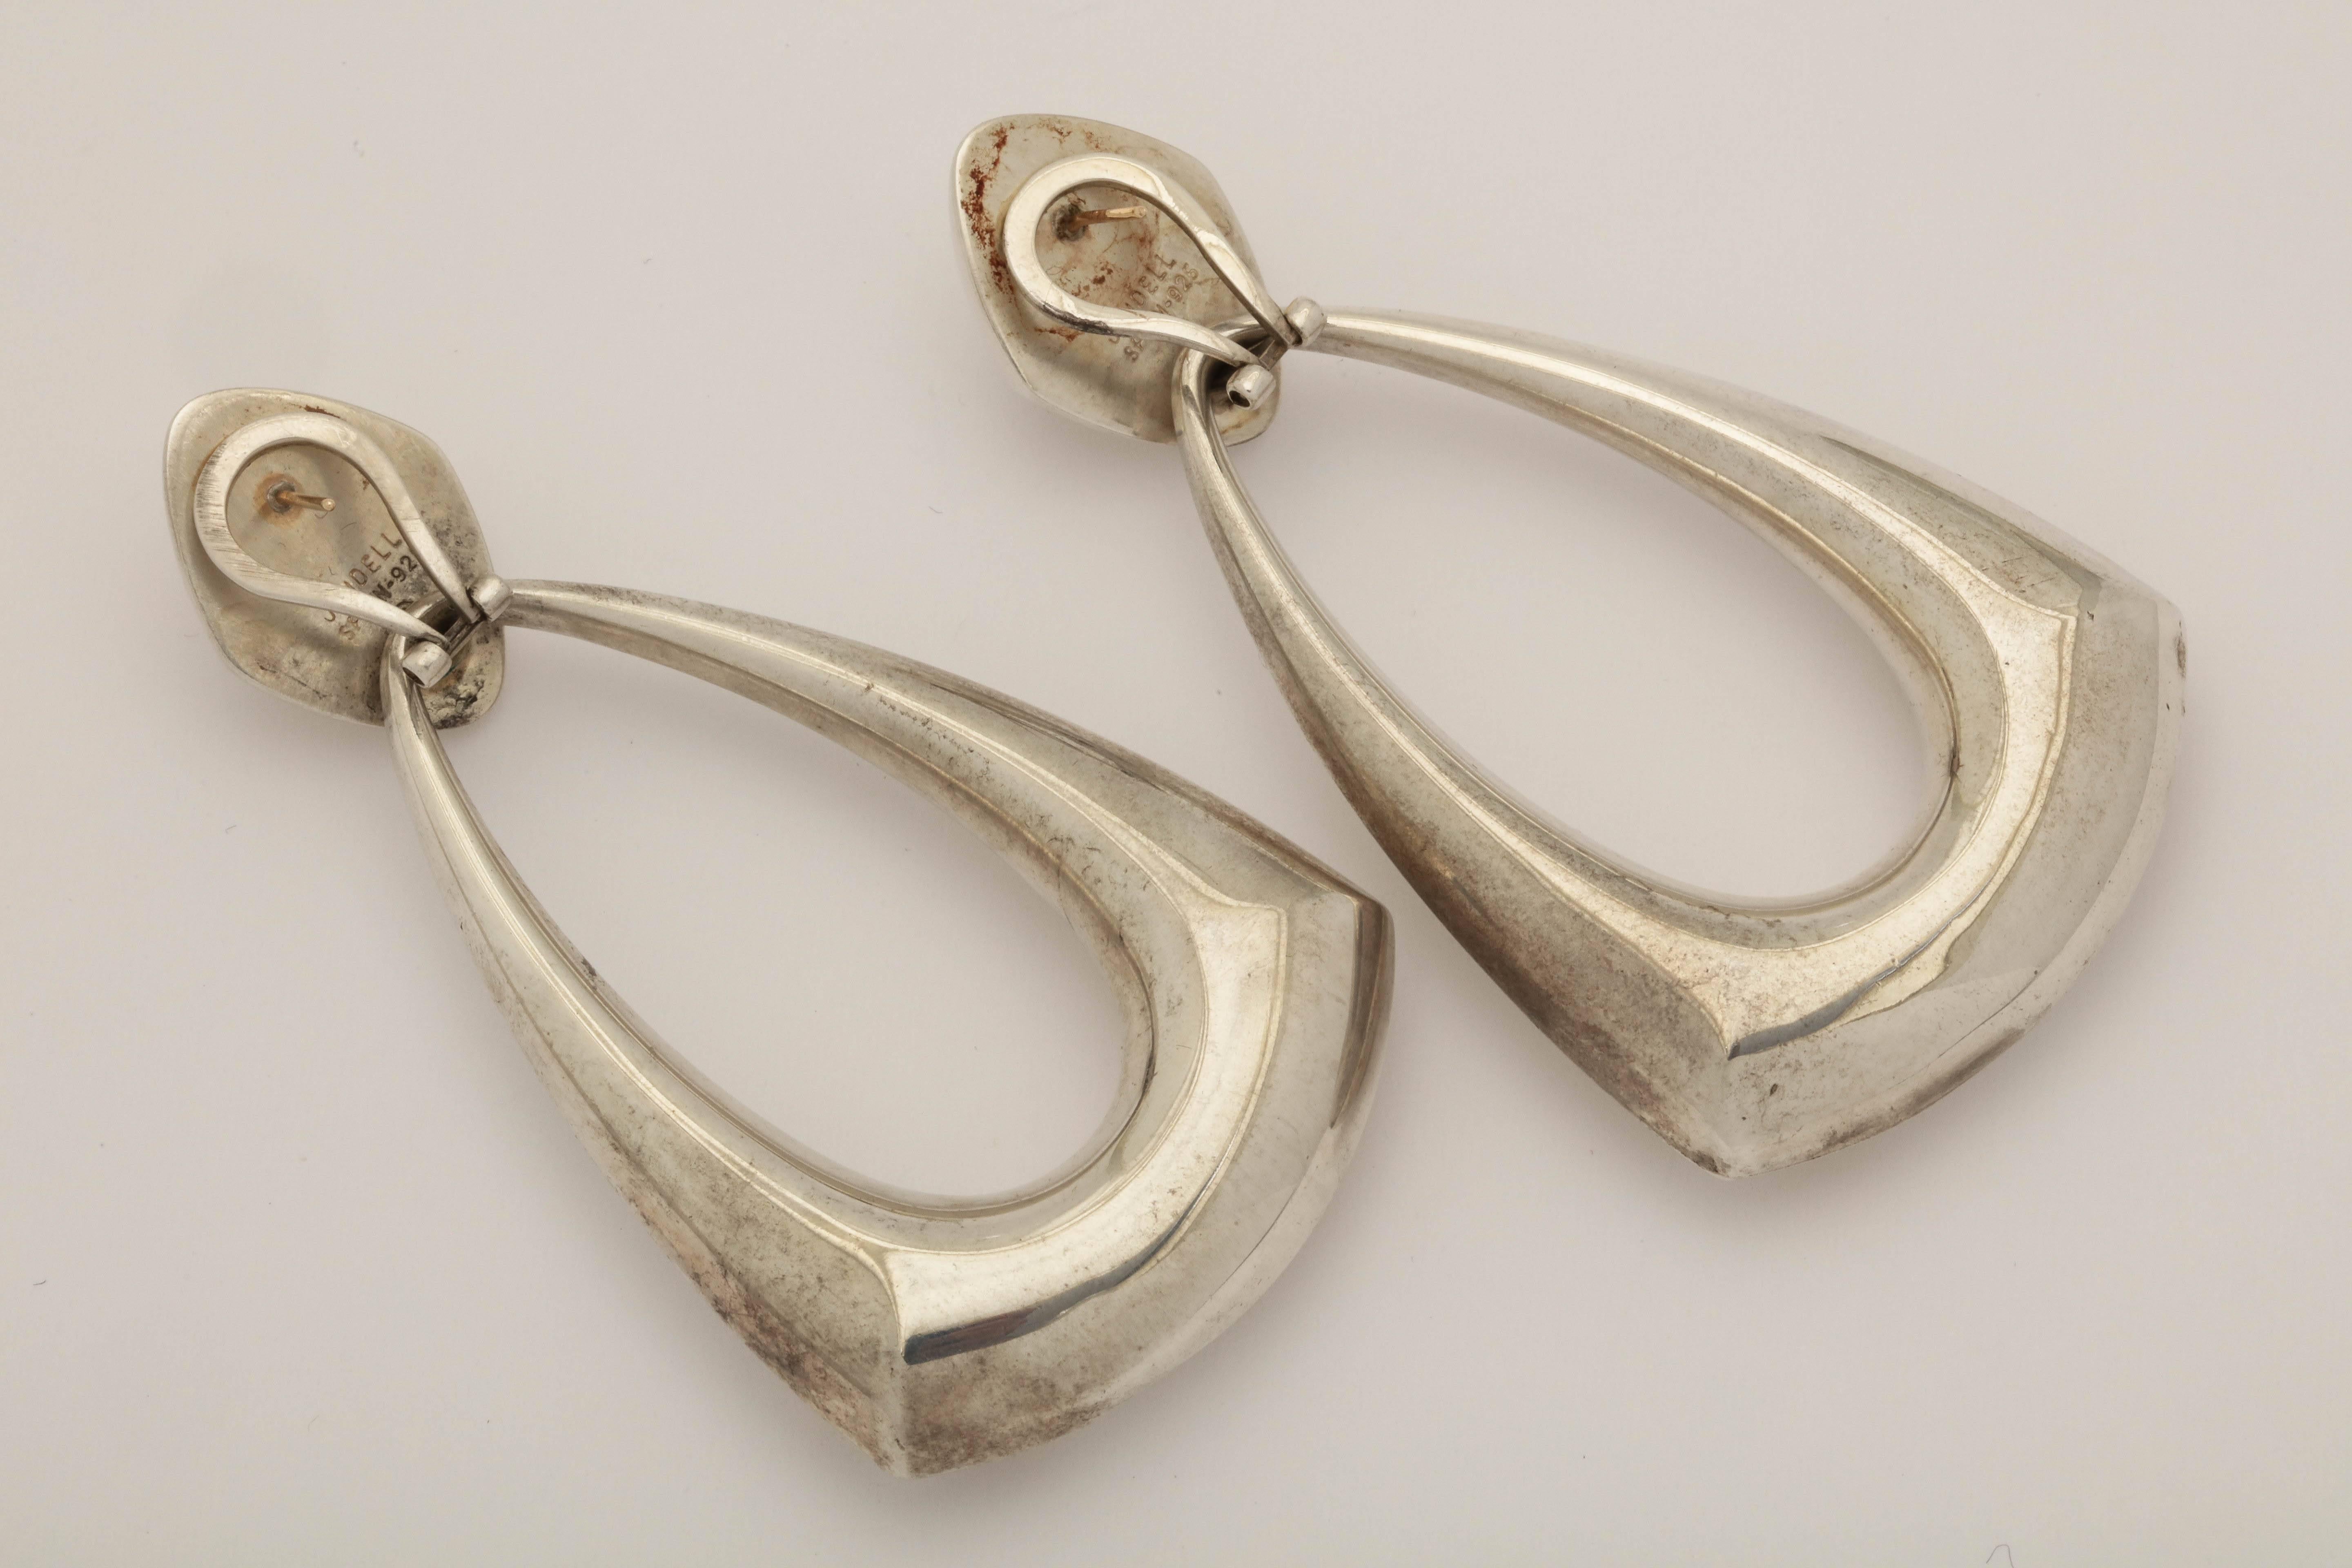 Women's 1980s Sterling Silver Detachable Large Doornocker Hanging Earrings with Posts